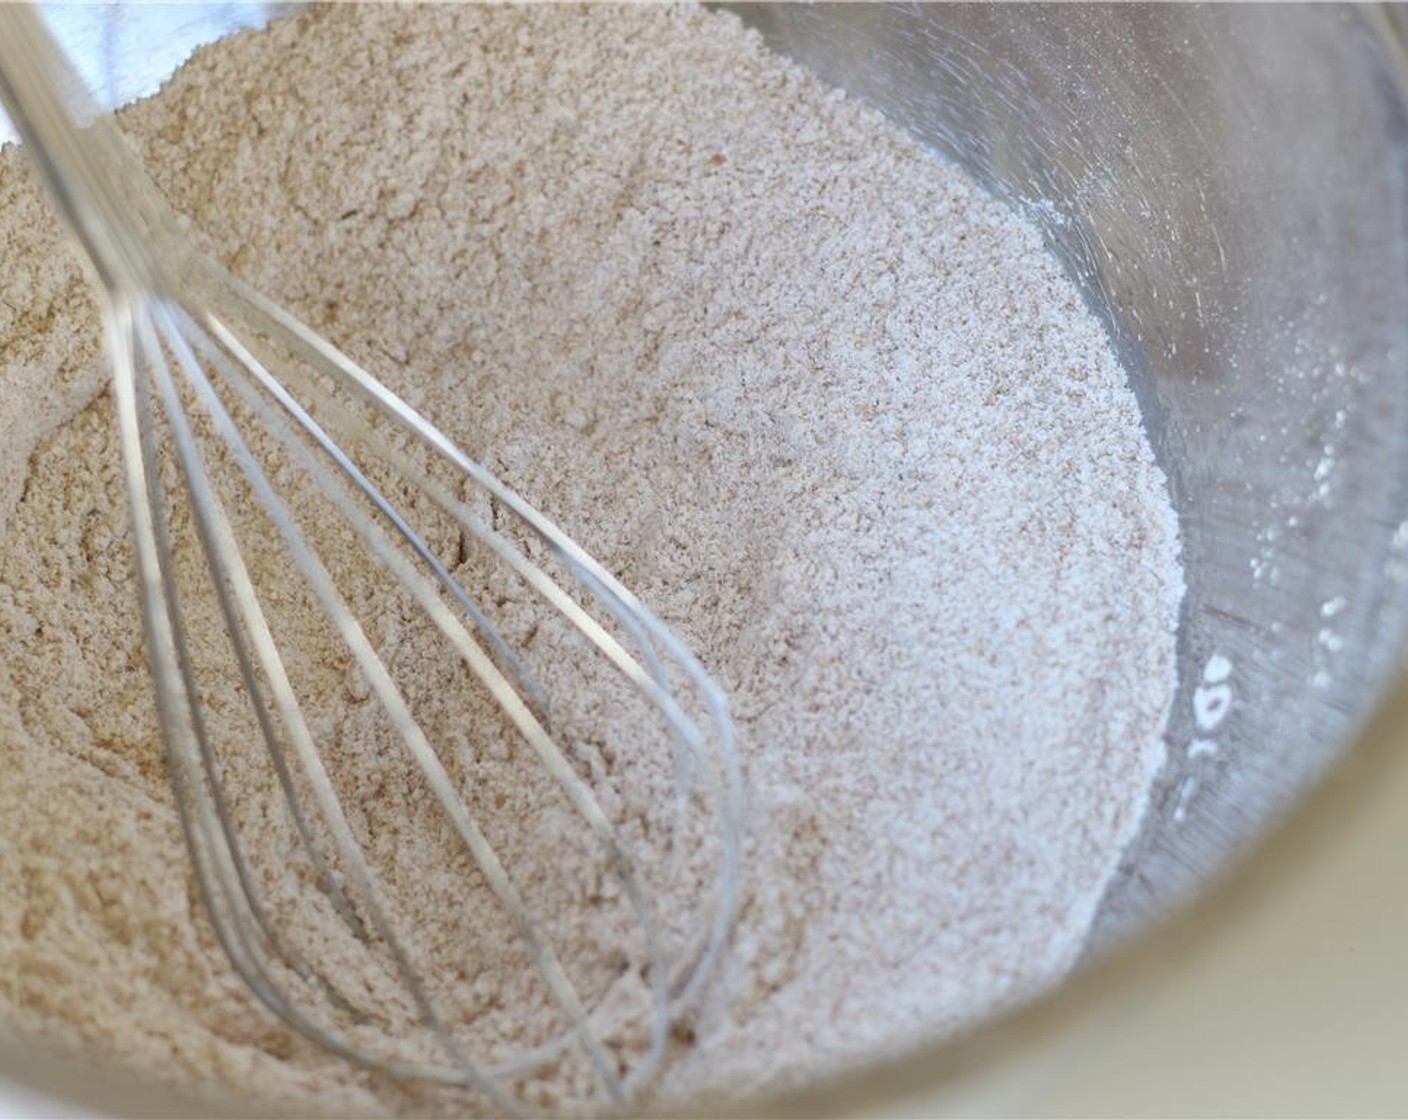 step 5 In a medium mixing bowl, whisk to combine the Whole Wheat Flour (1 1/3 cups), Granulated Sugar (2/3 cup), Baking Powder (1/2 Tbsp), Baking Soda (1/4 tsp), and Salt (1/4 tsp).